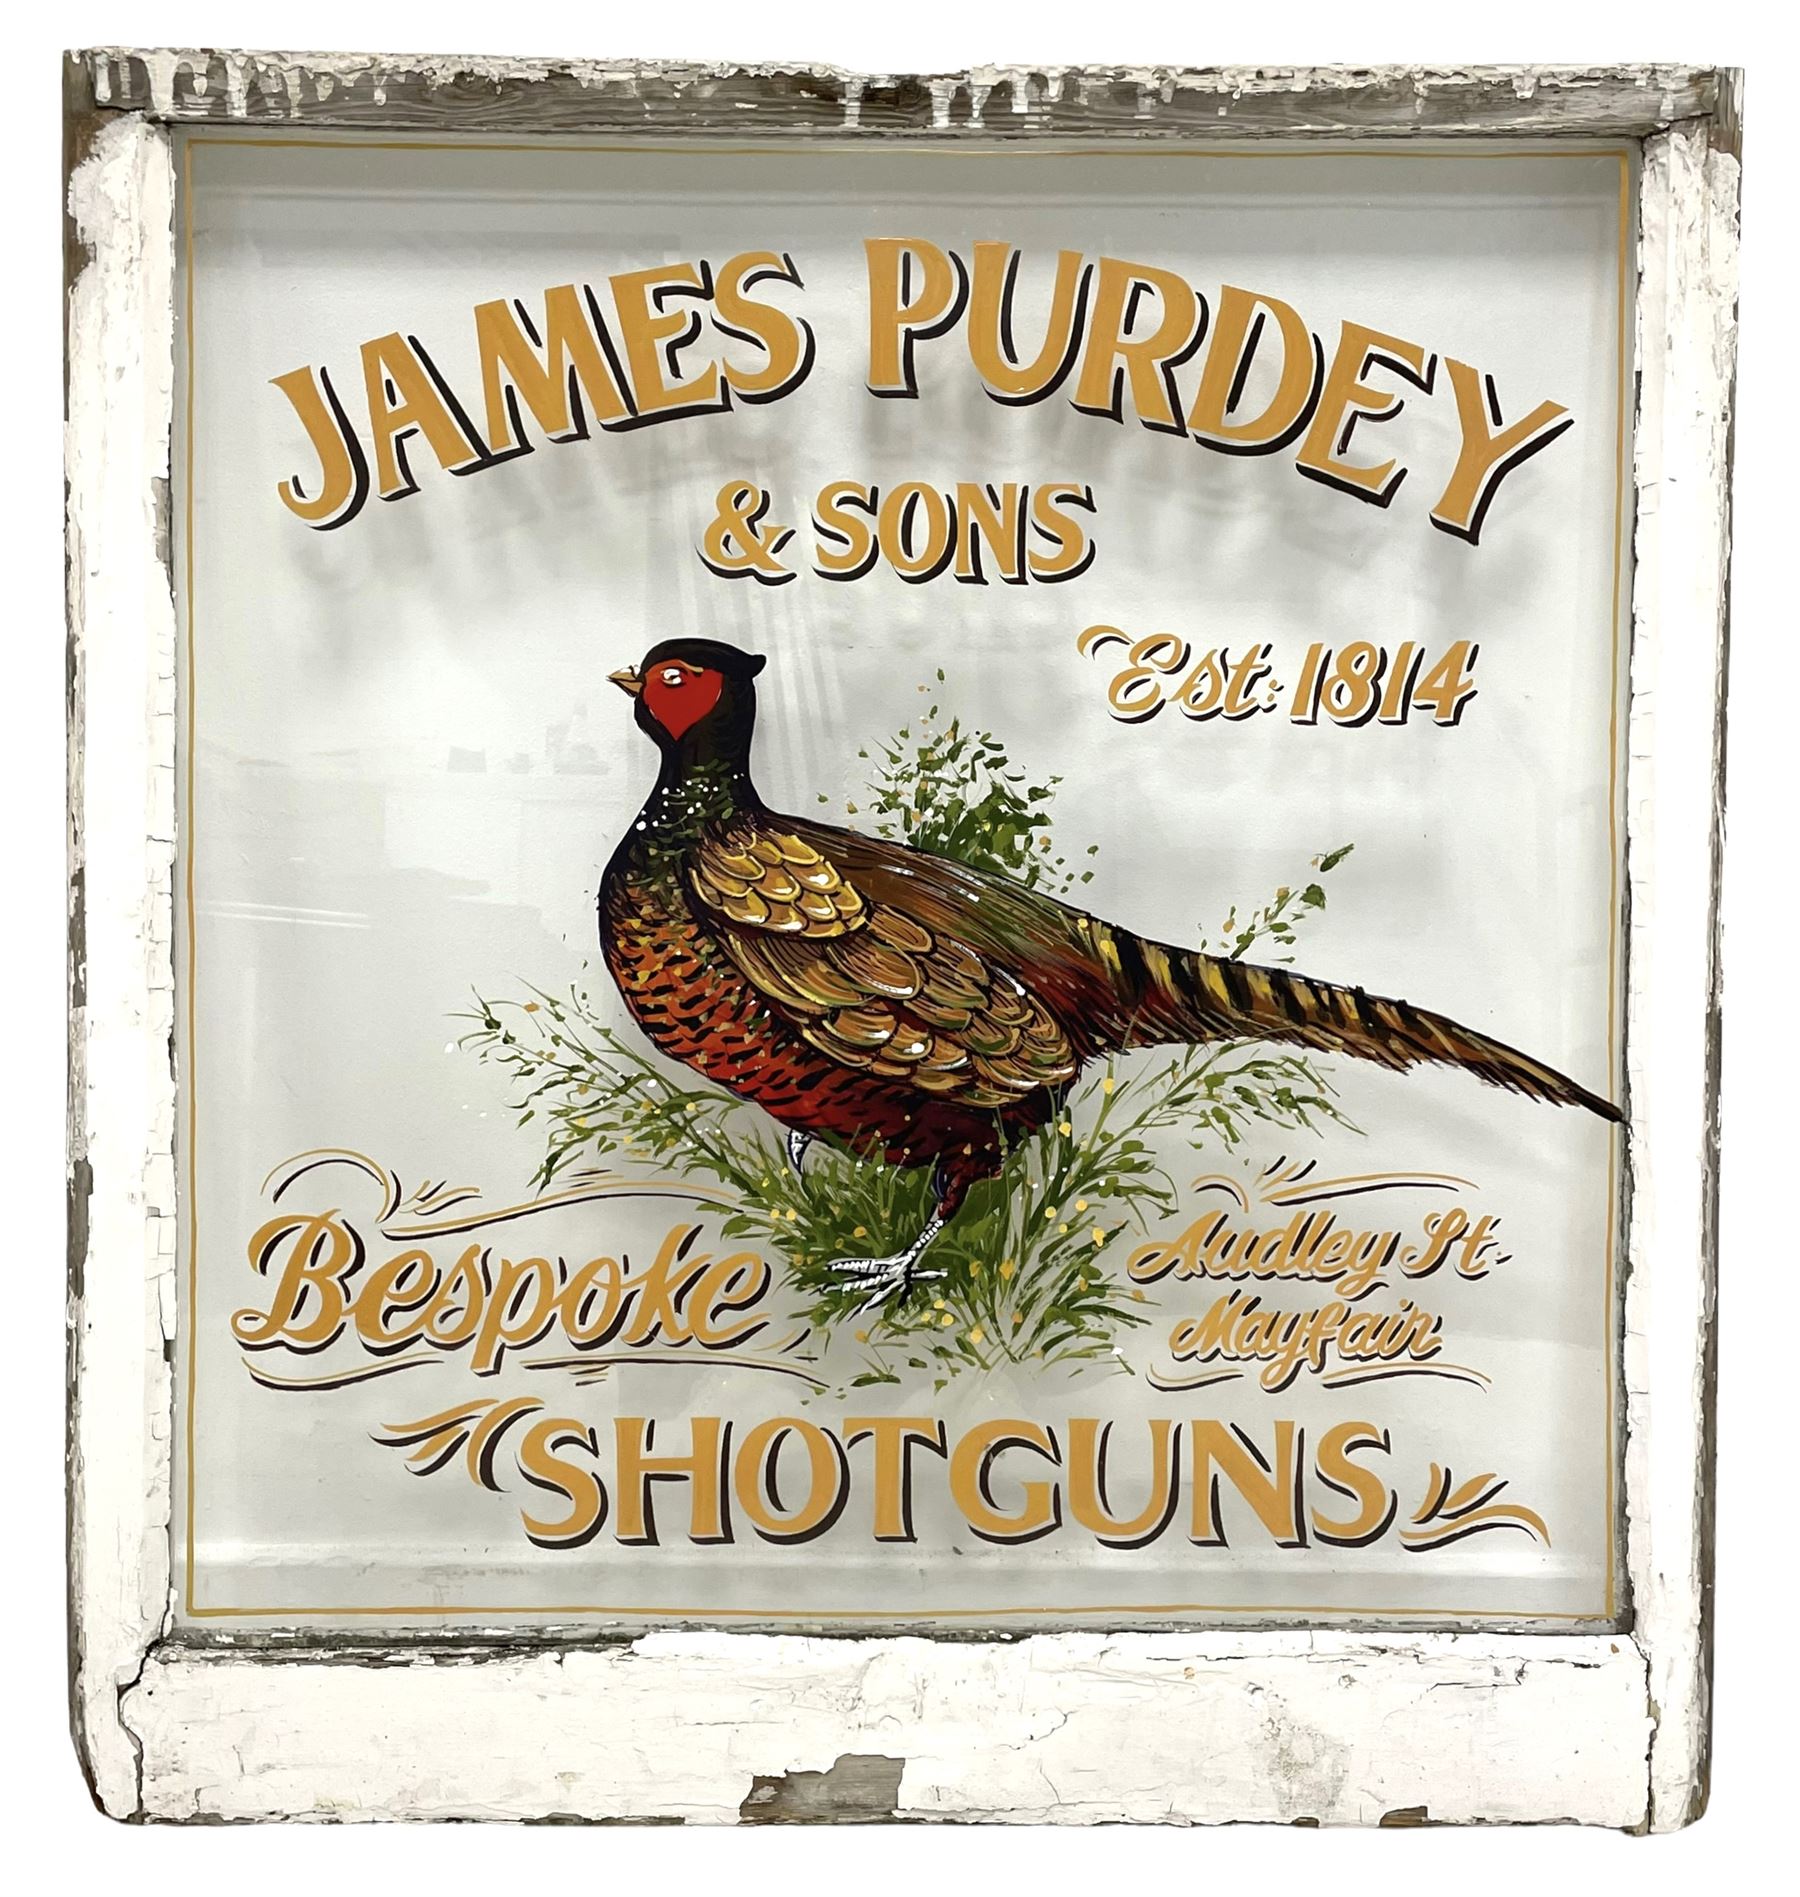 White painted window with hand painted advertising "Purdey and Sons